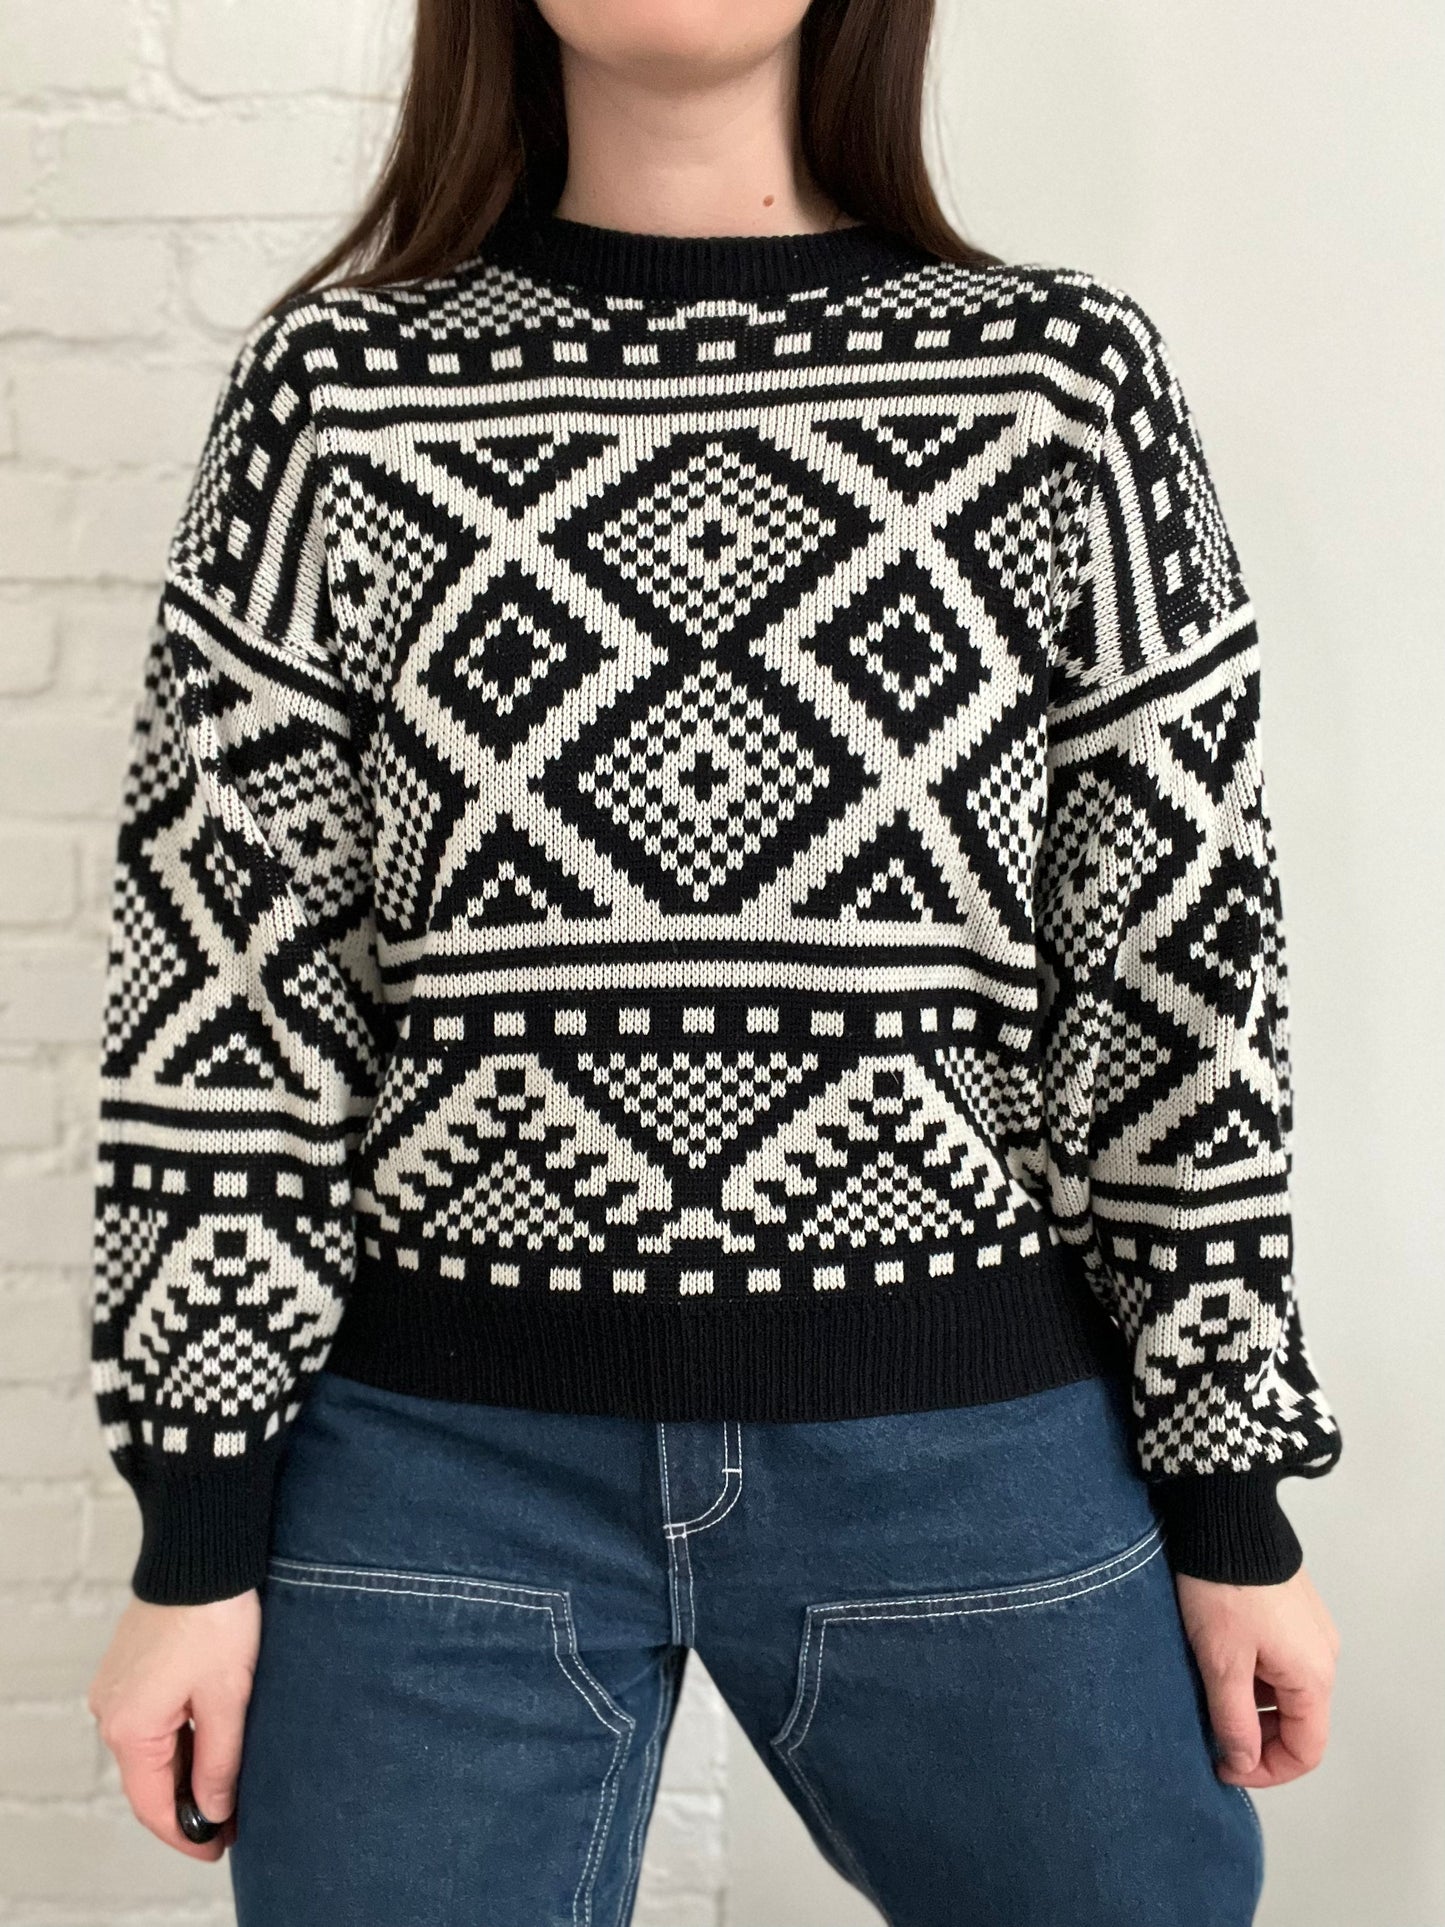 Abstract Artsy Knit Sweater - M/L